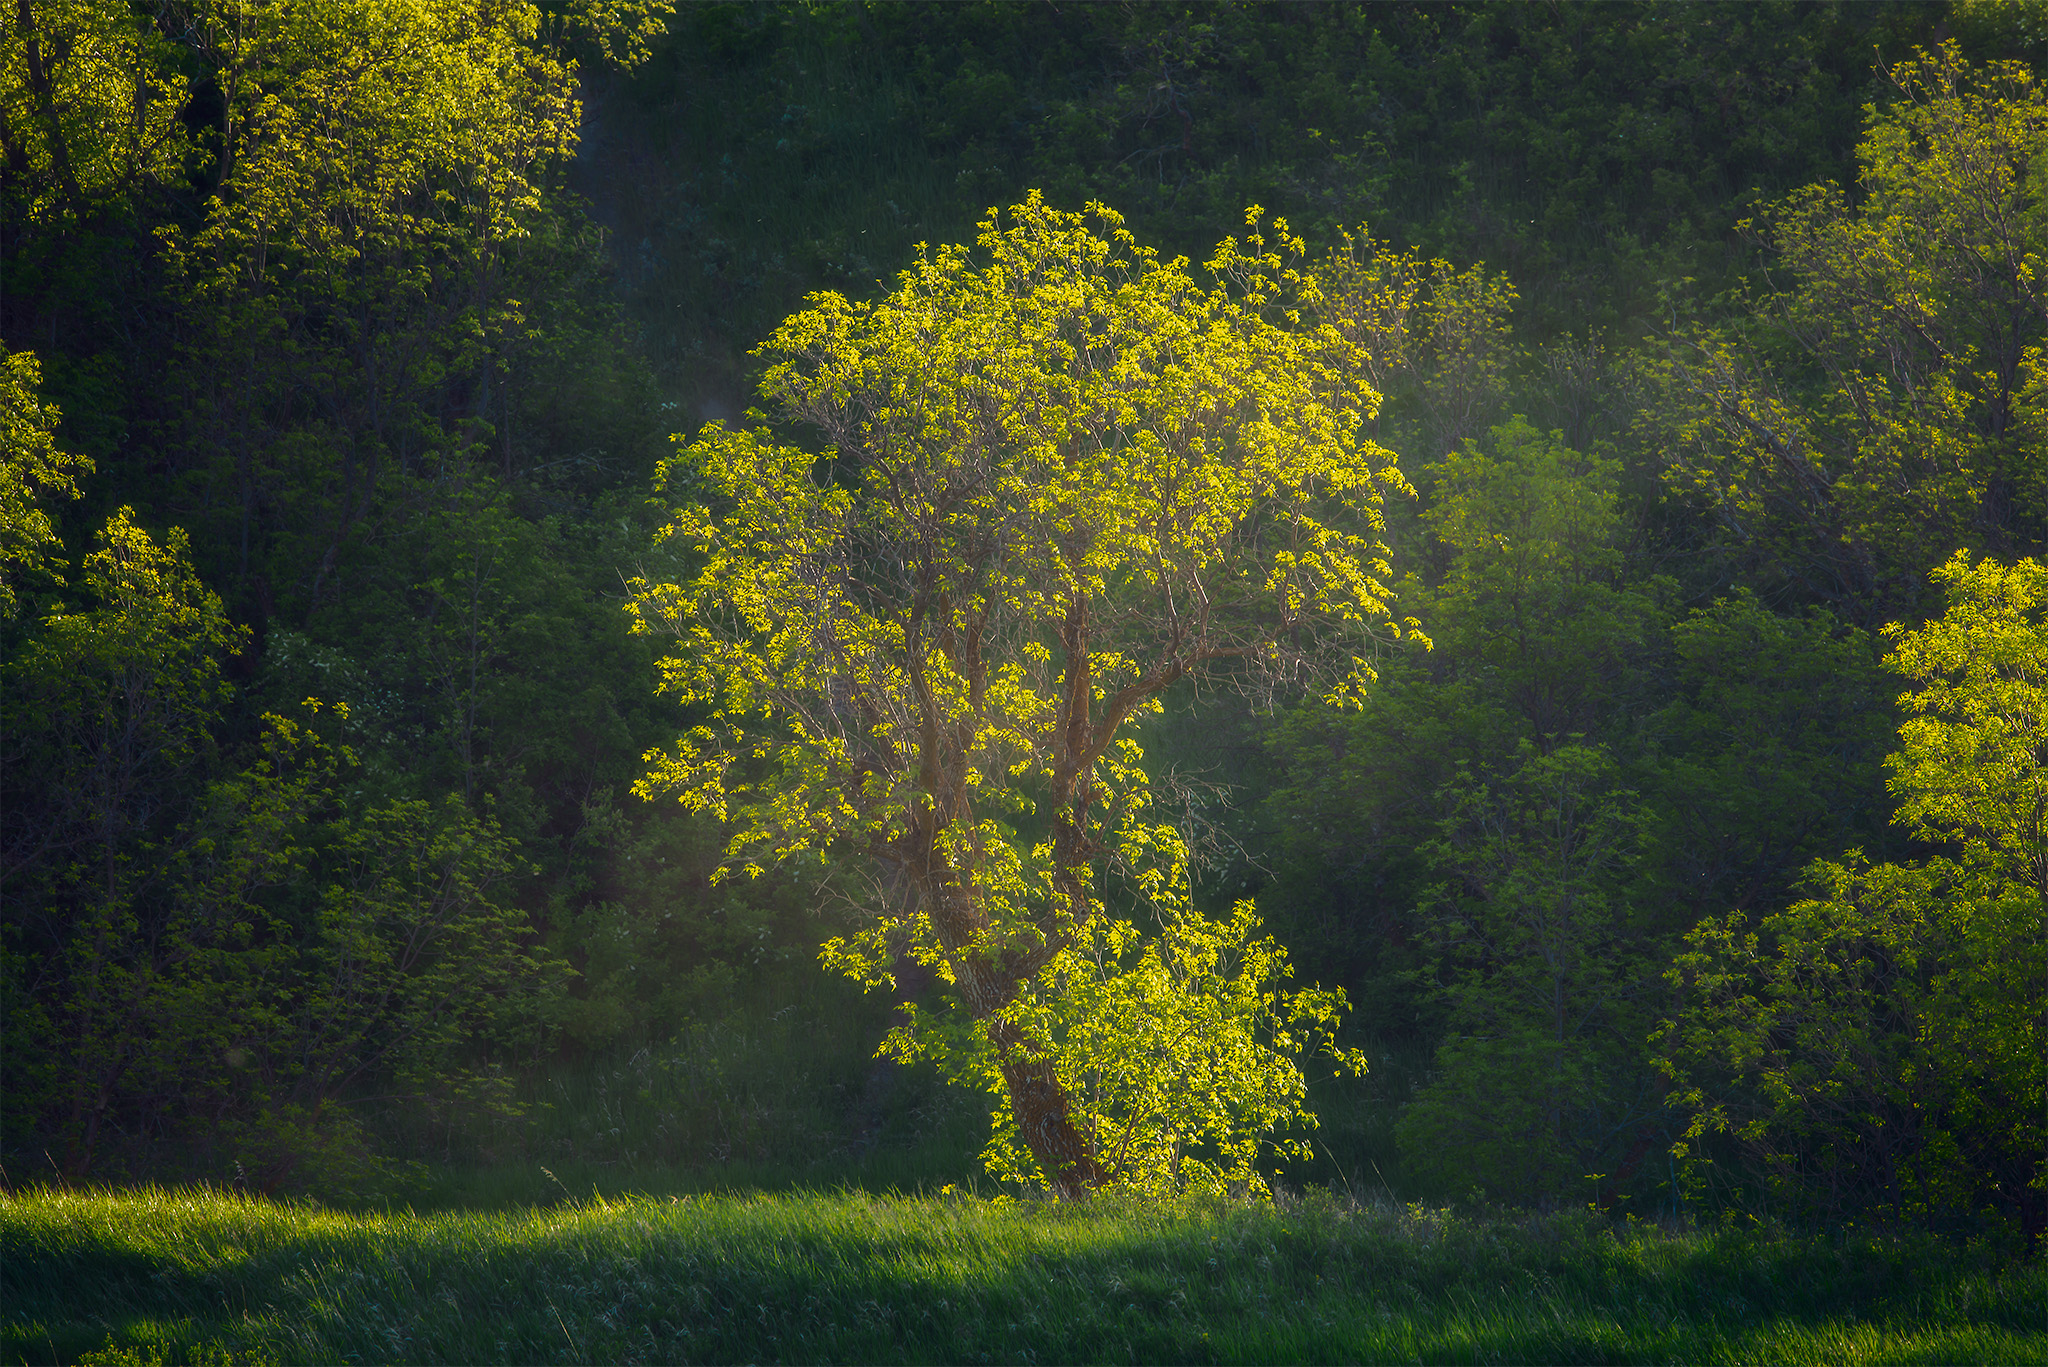 An intimate landscape photograph of a backlit tree during spring at Wascana Trails in Saskatchewan